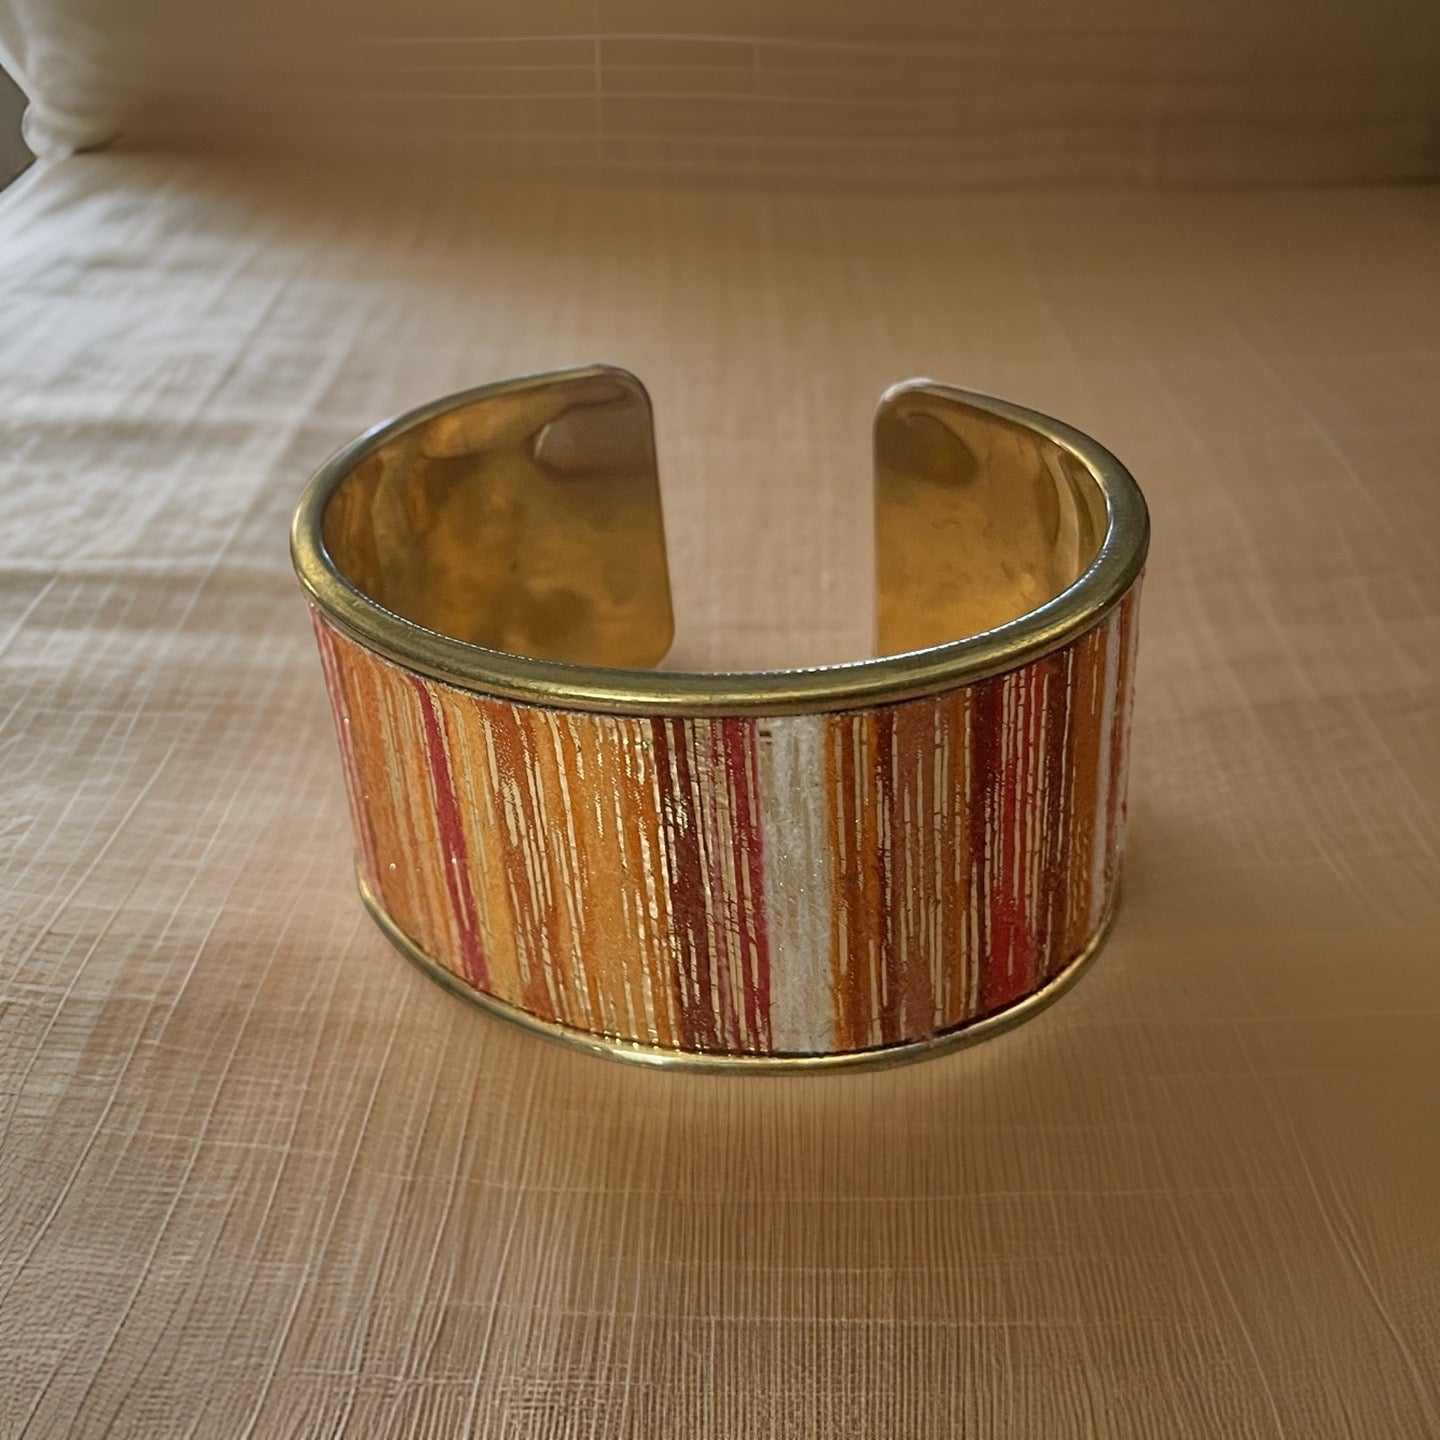 Suede Striped Cuff Bracelets with Metallic Accents - Available in 3 Colors